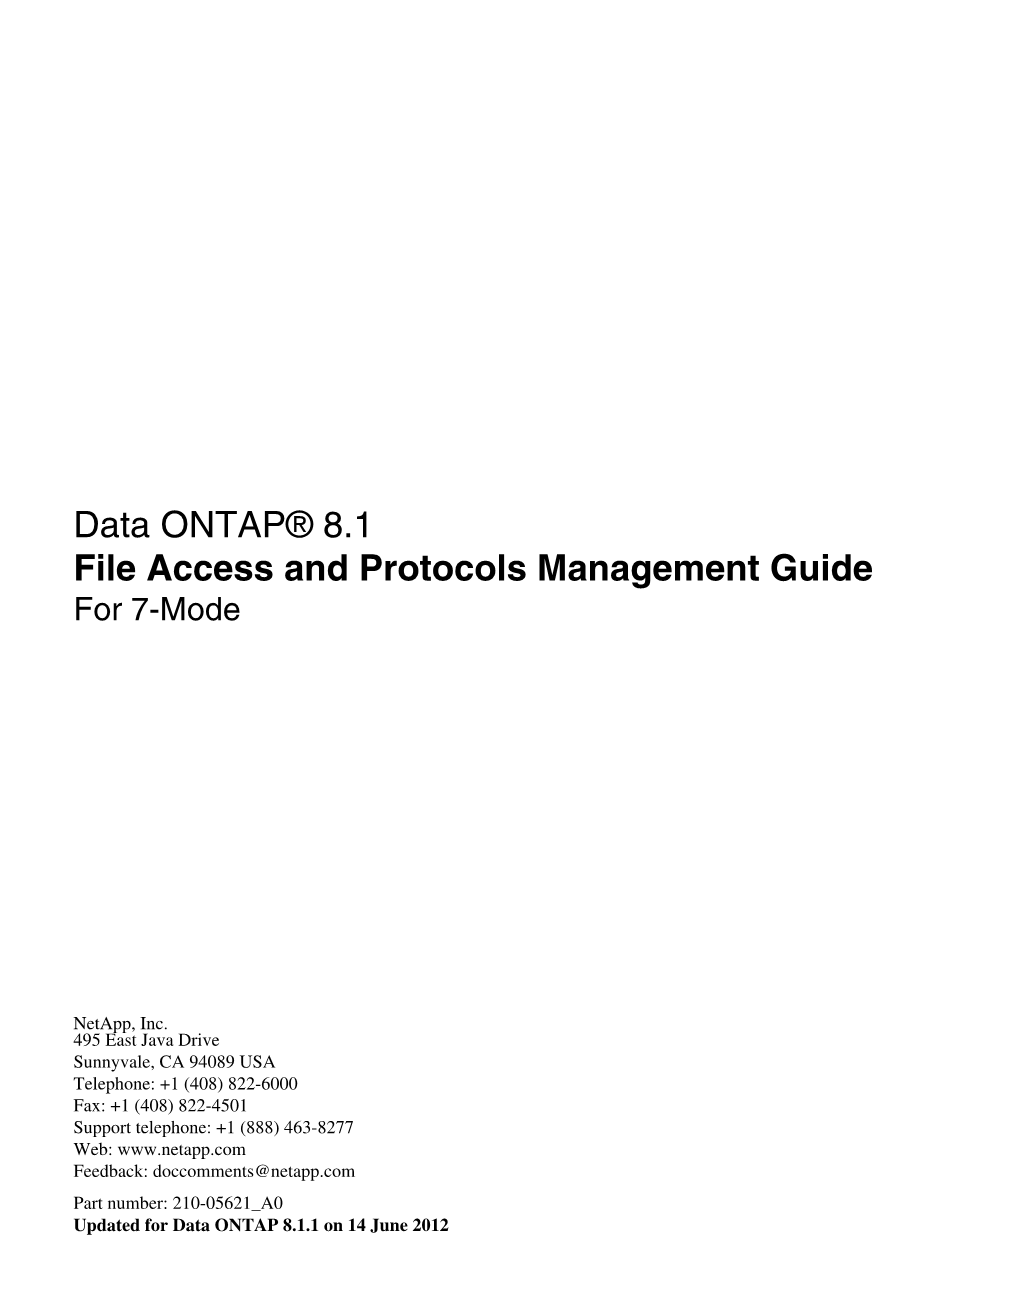 Data ONTAP® 8.1 File Access and Protocols Management Guide for 7-Mode